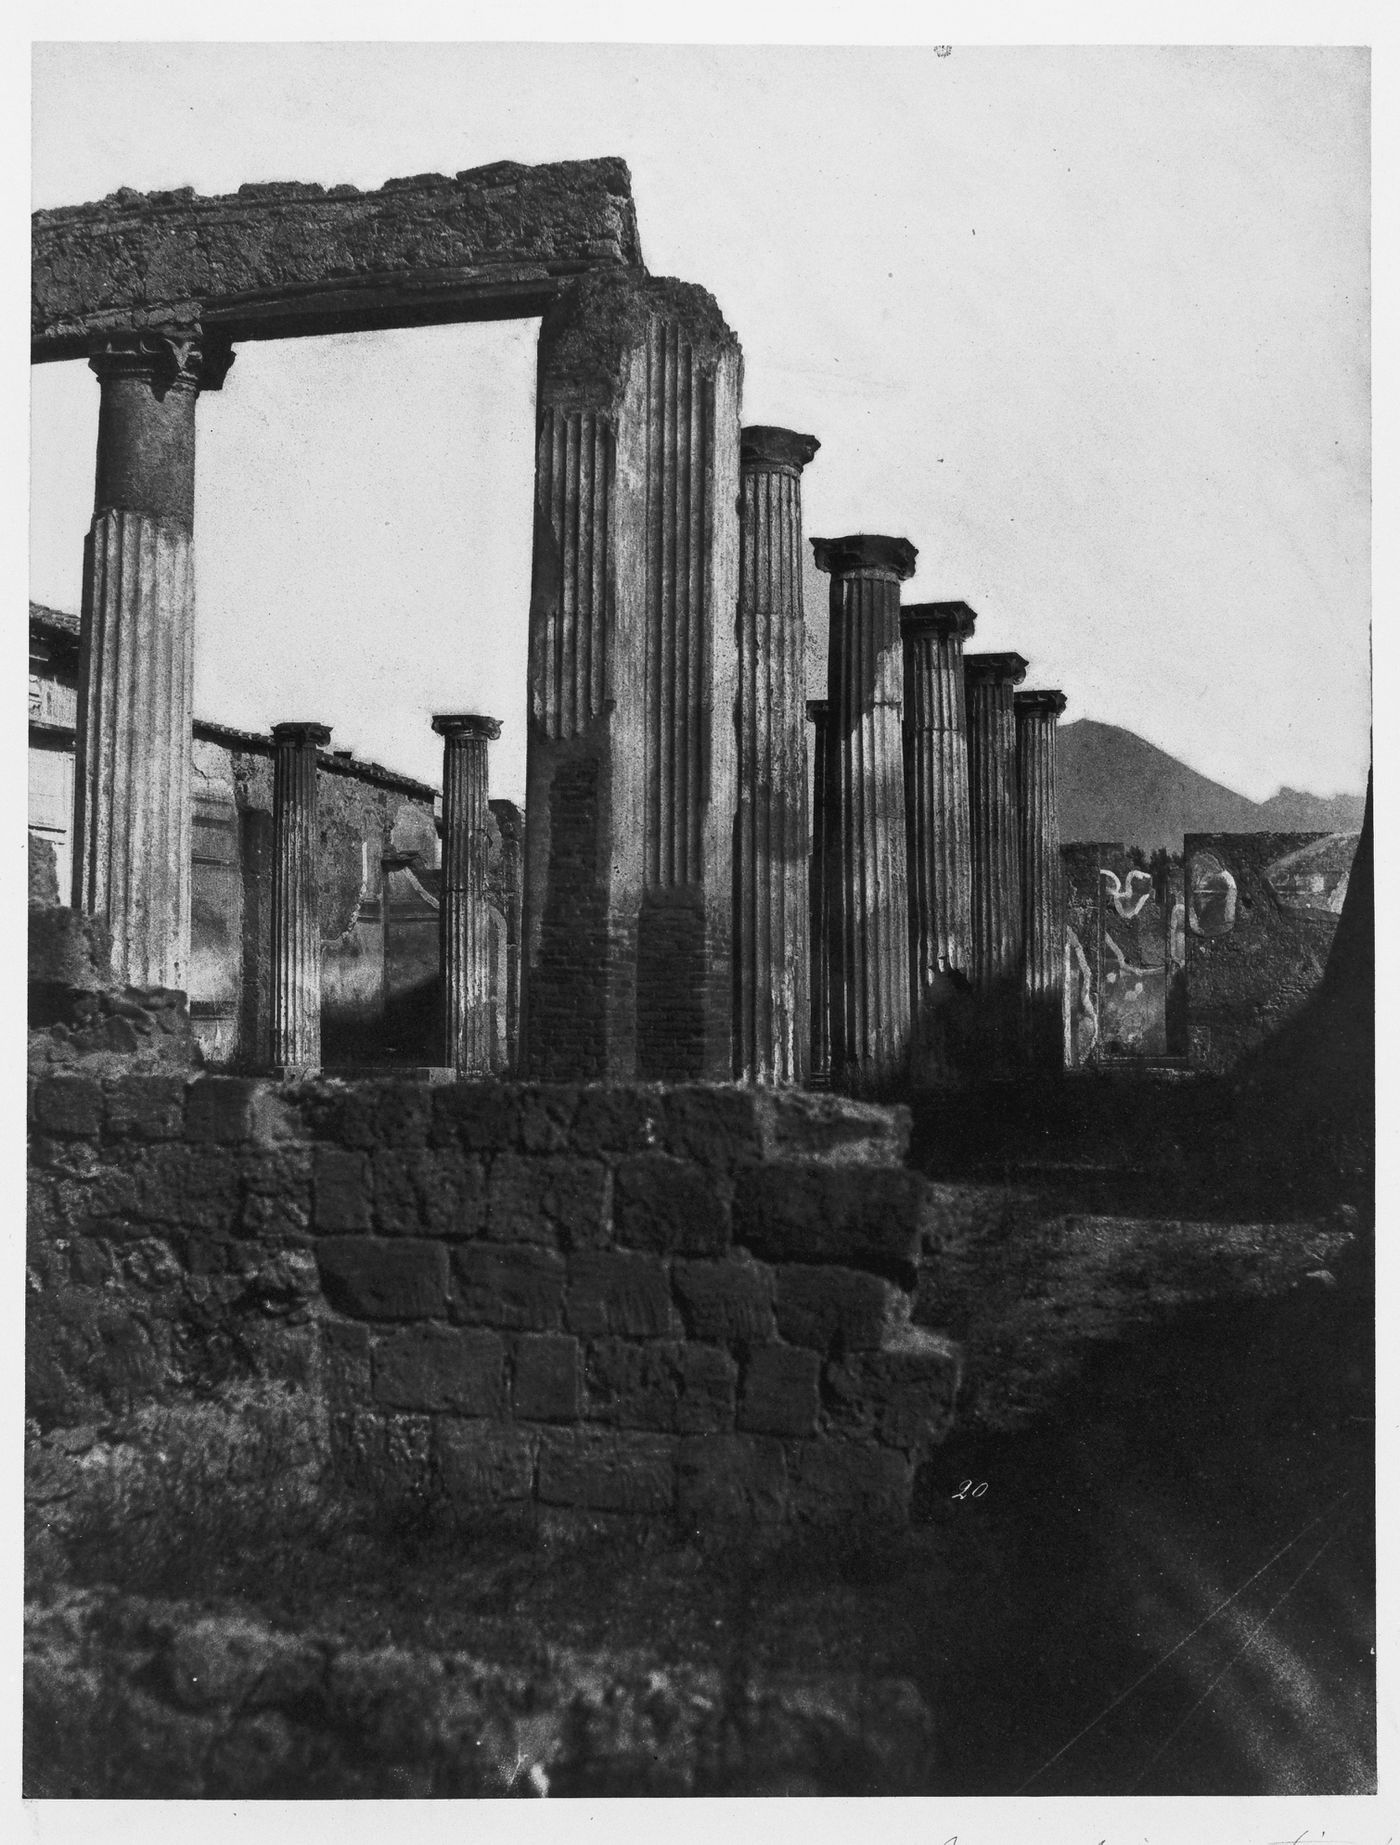 View of colonnade, Pompeii, Italy